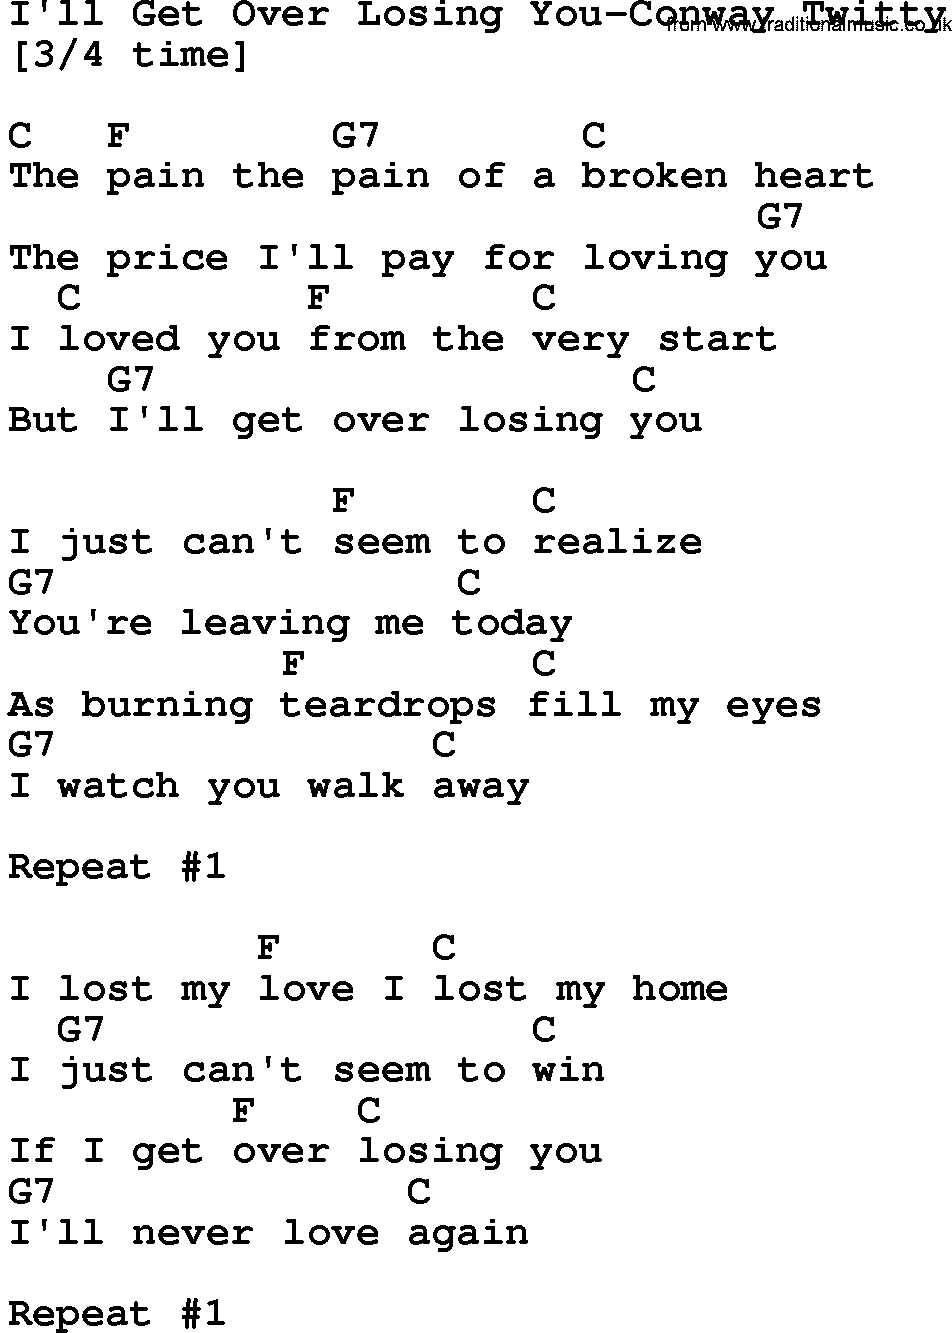 Country music song: I'll Get Over Losing You-Conway Twitty lyrics and chords